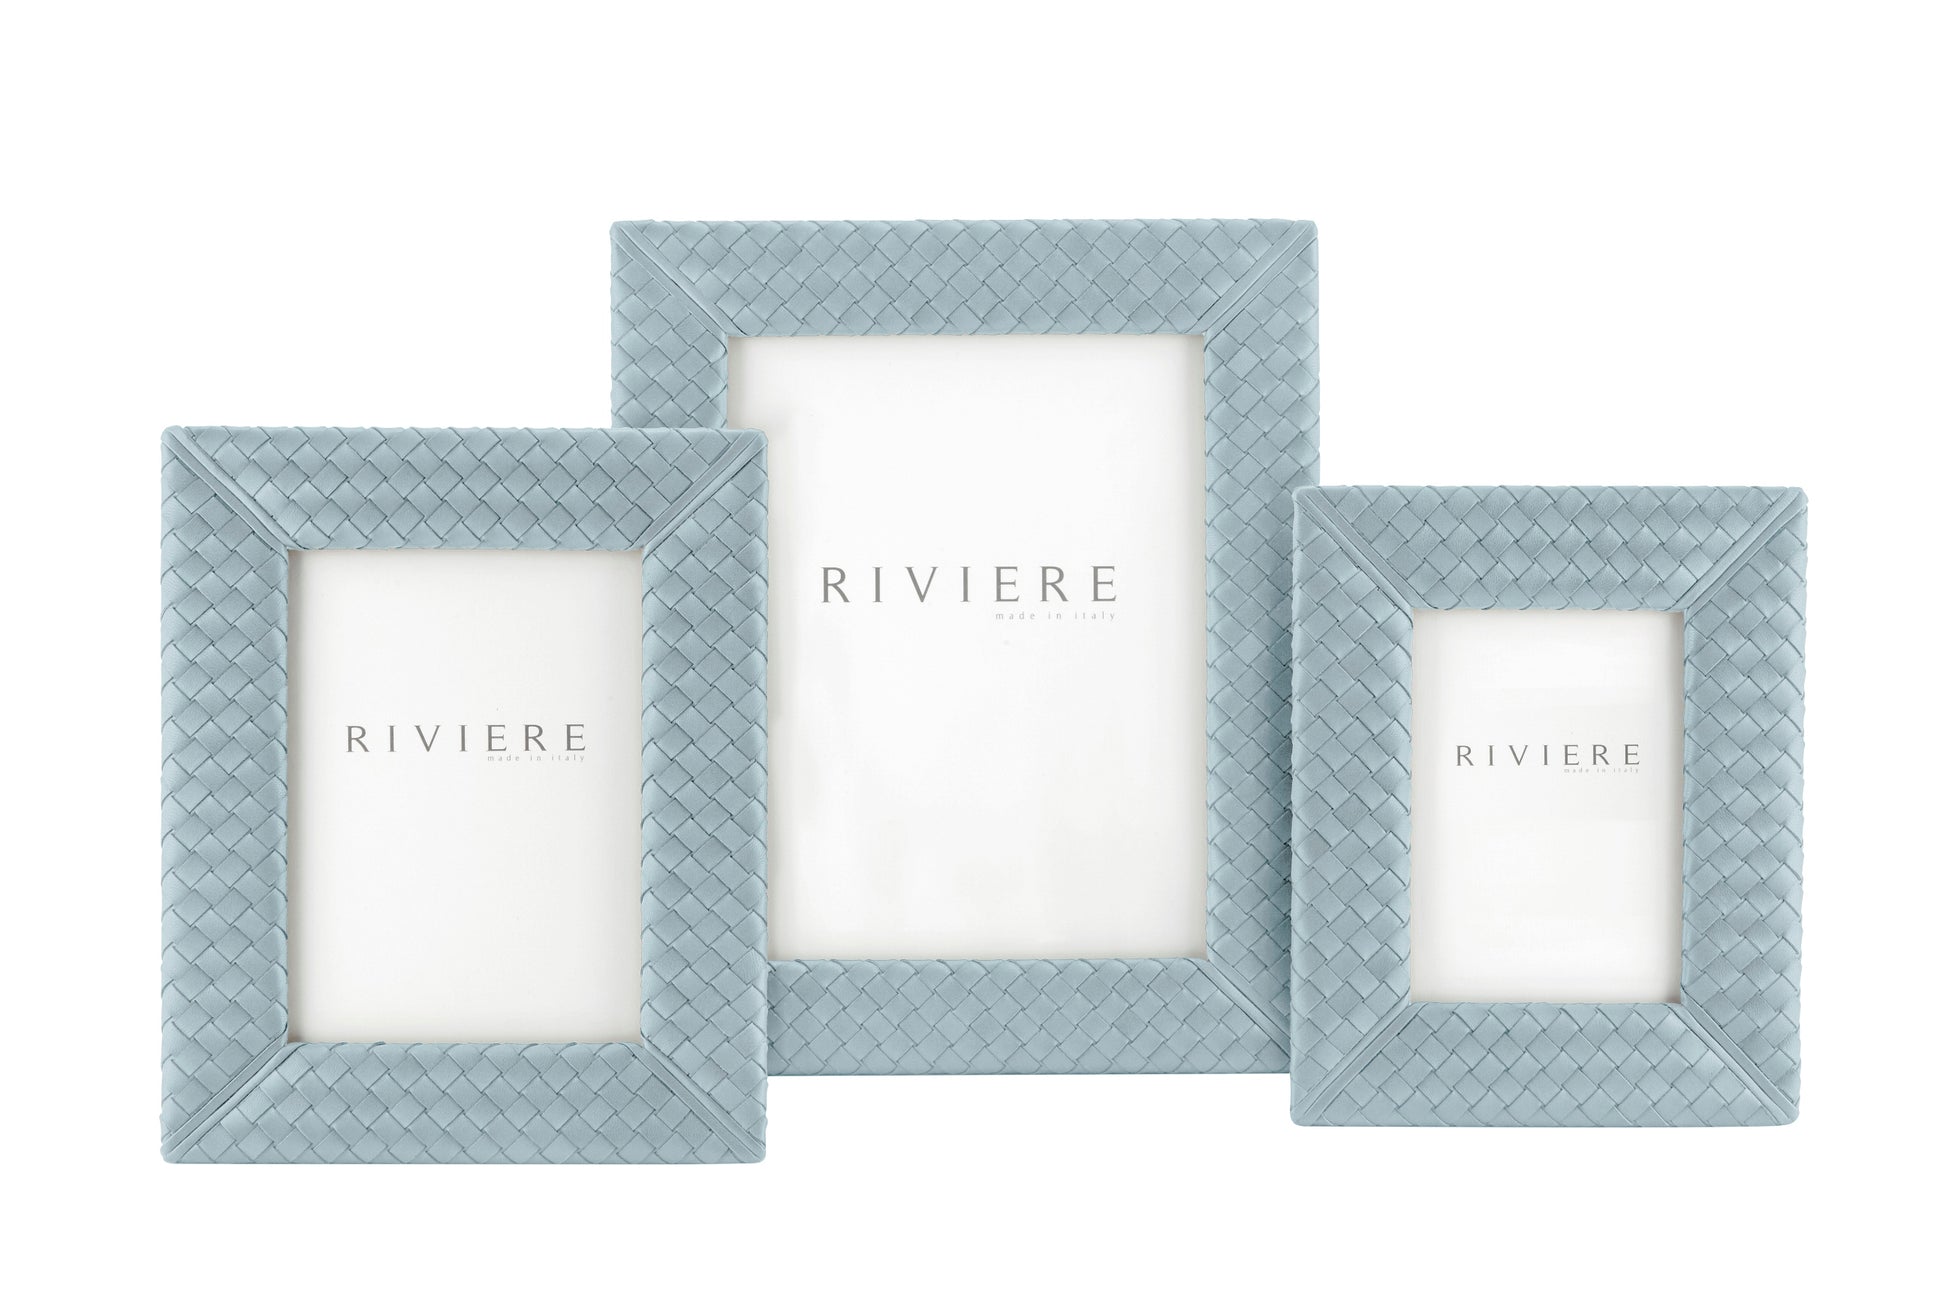 Riviere Nora Handwoven Leather Picture Frame | Exquisite Handwoven Leather Design | Adds a Touch of Artisanal Elegance to Your Home | Elevate Your Decor with Luxury Accessories from Riviere | Available at 2Jour Concierge, #1 luxury high-end gift & lifestyle shop